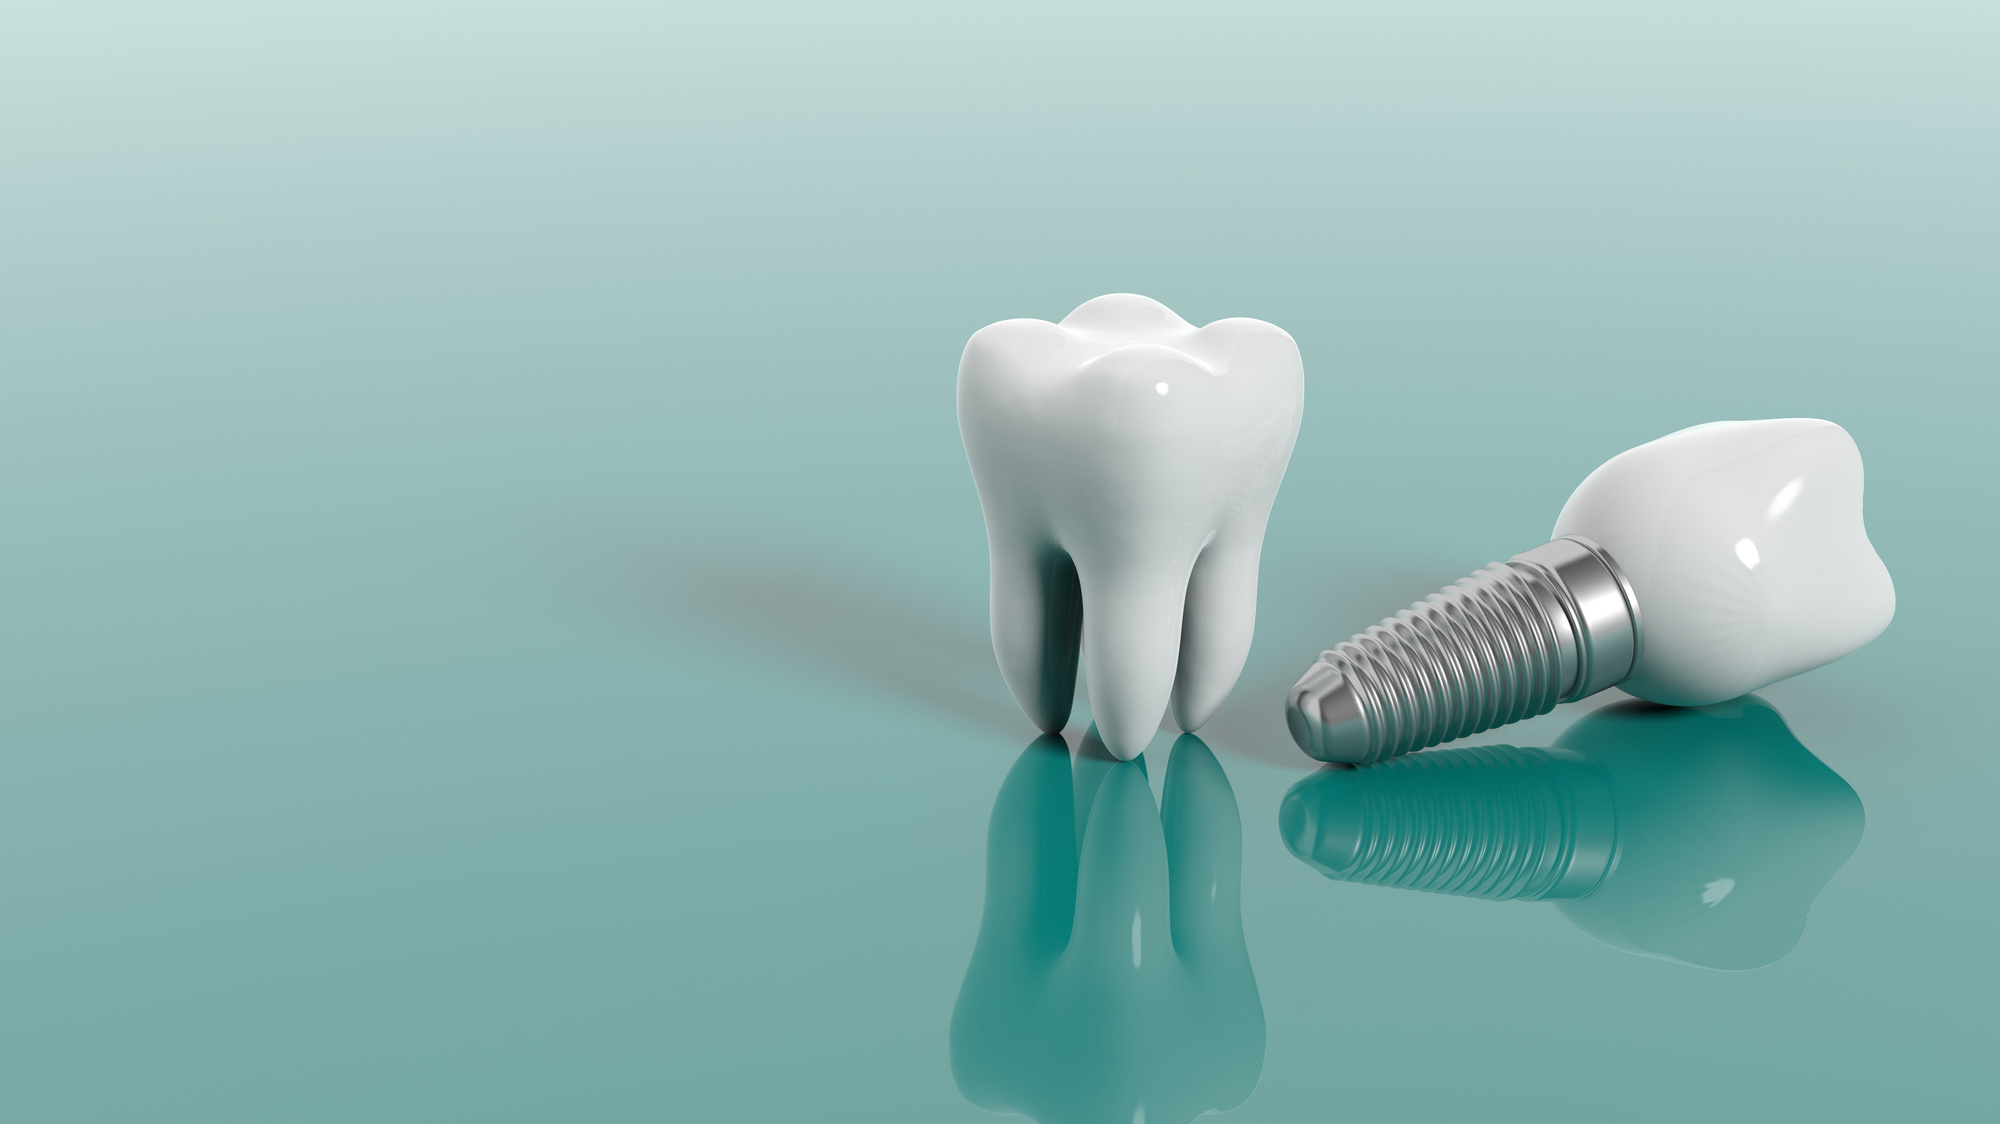 How Can Dental Implants Be Experienced Without Pain?